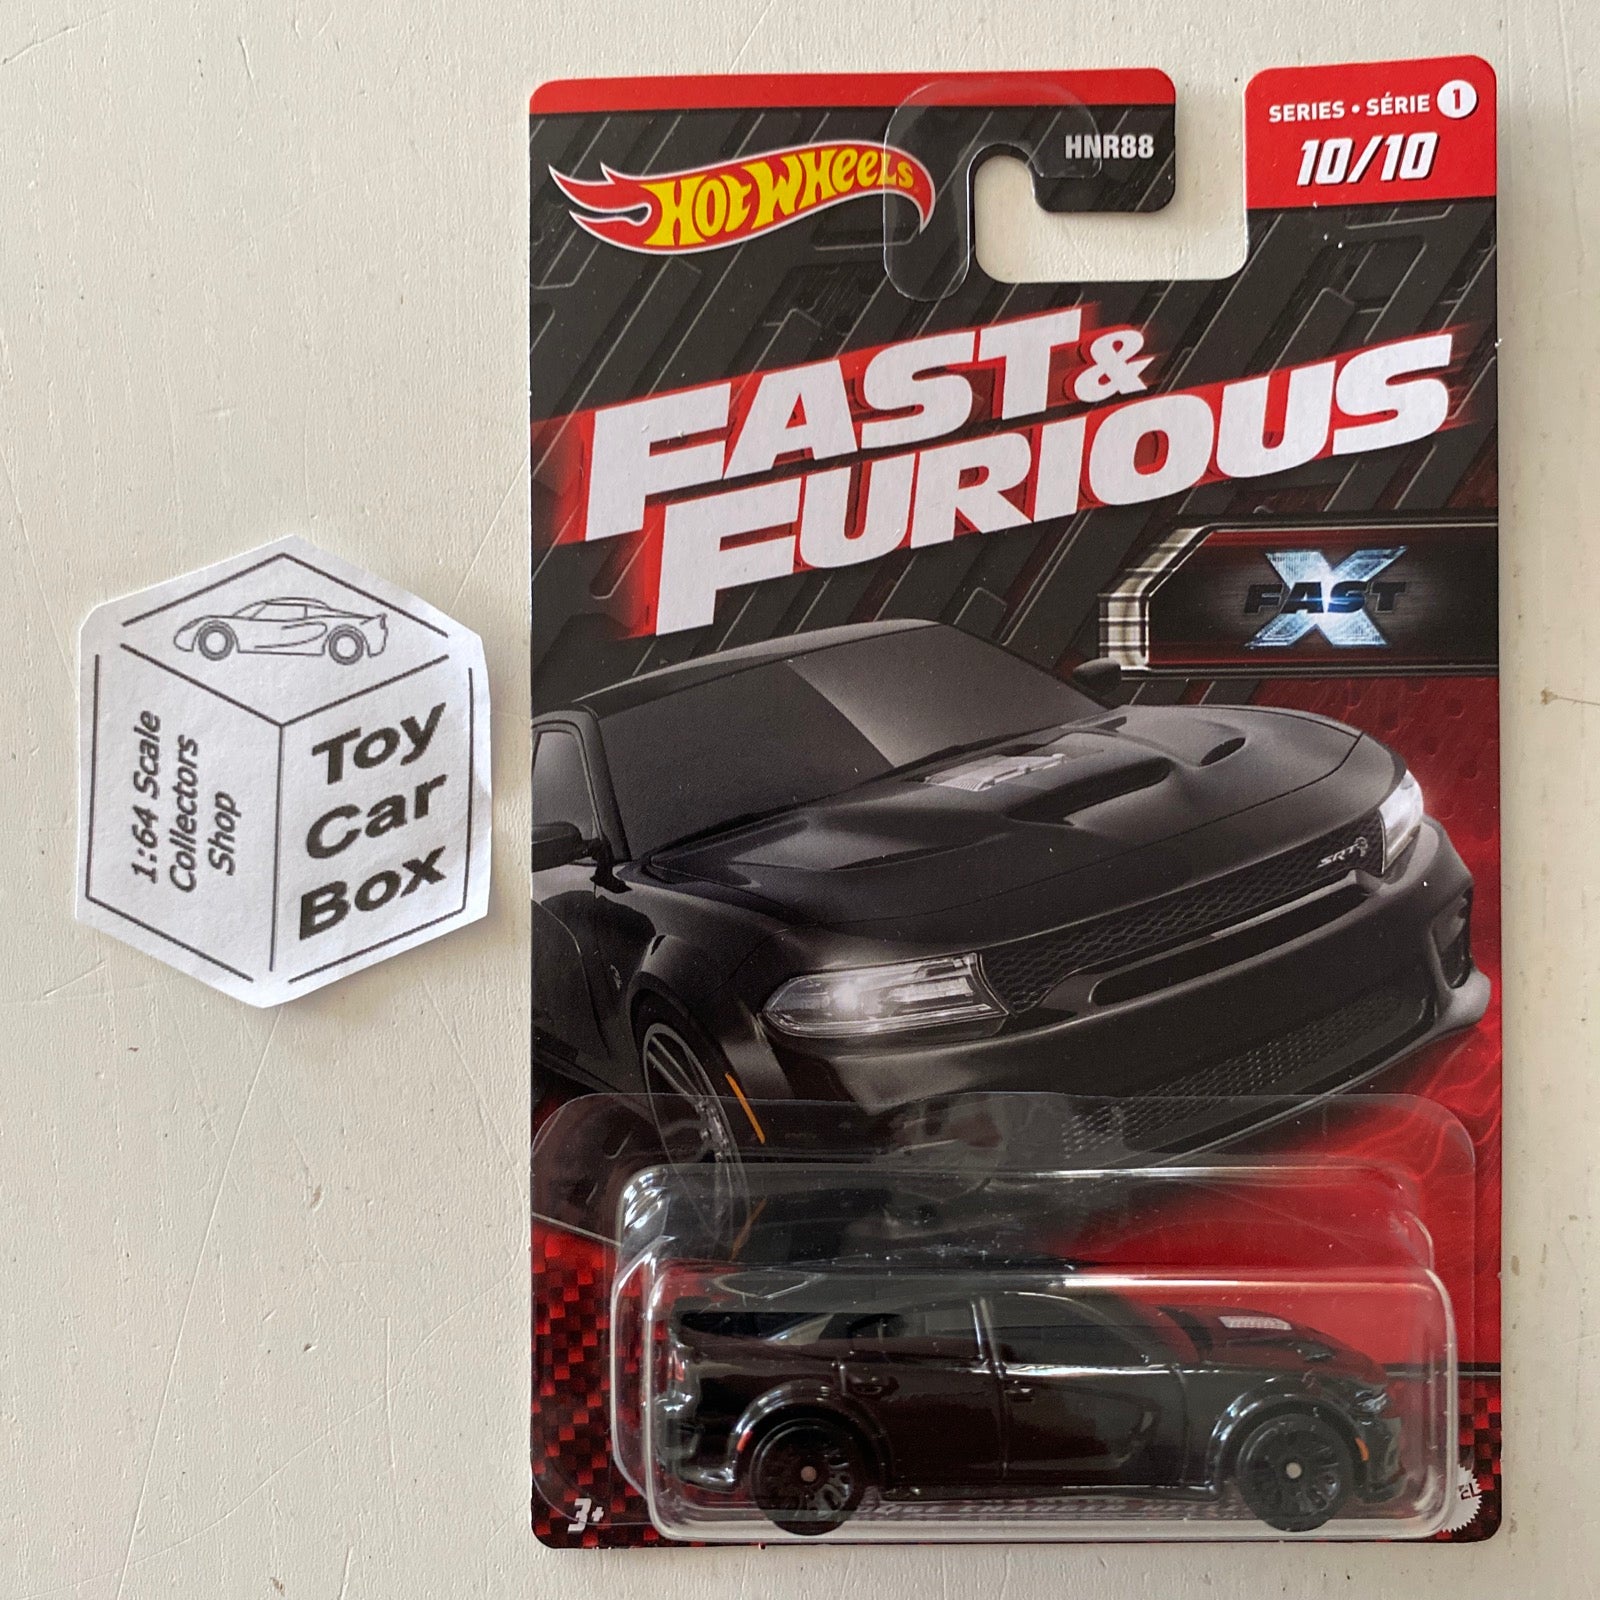 Fast and Furious Collectable Diecast Models by Hot Wheels Coming Soon